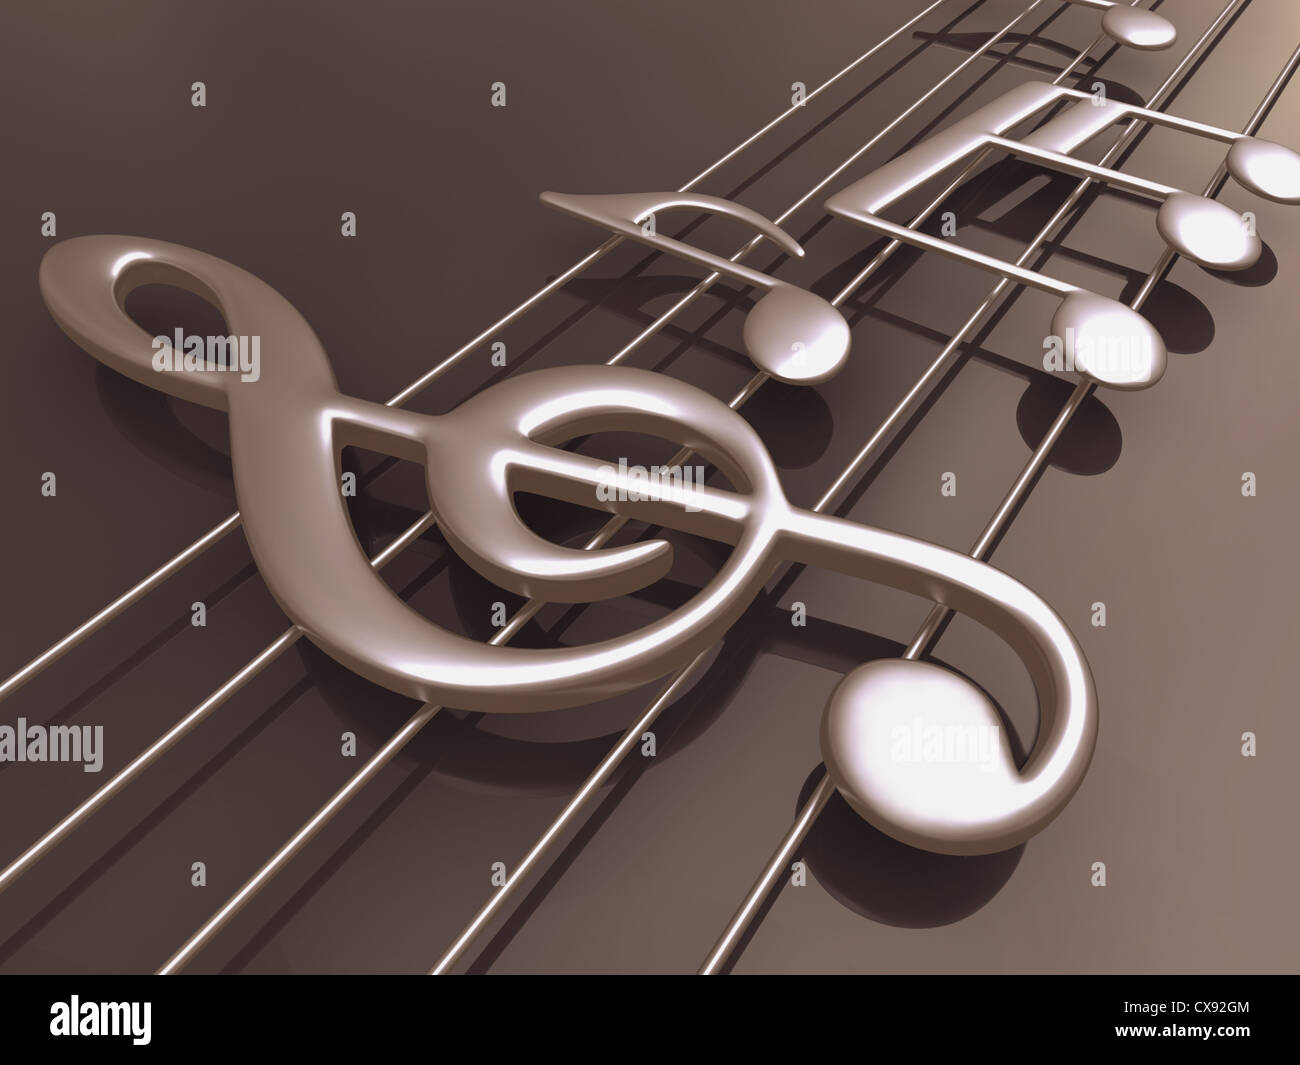 Musical notes standing on the floor. Stock Photo